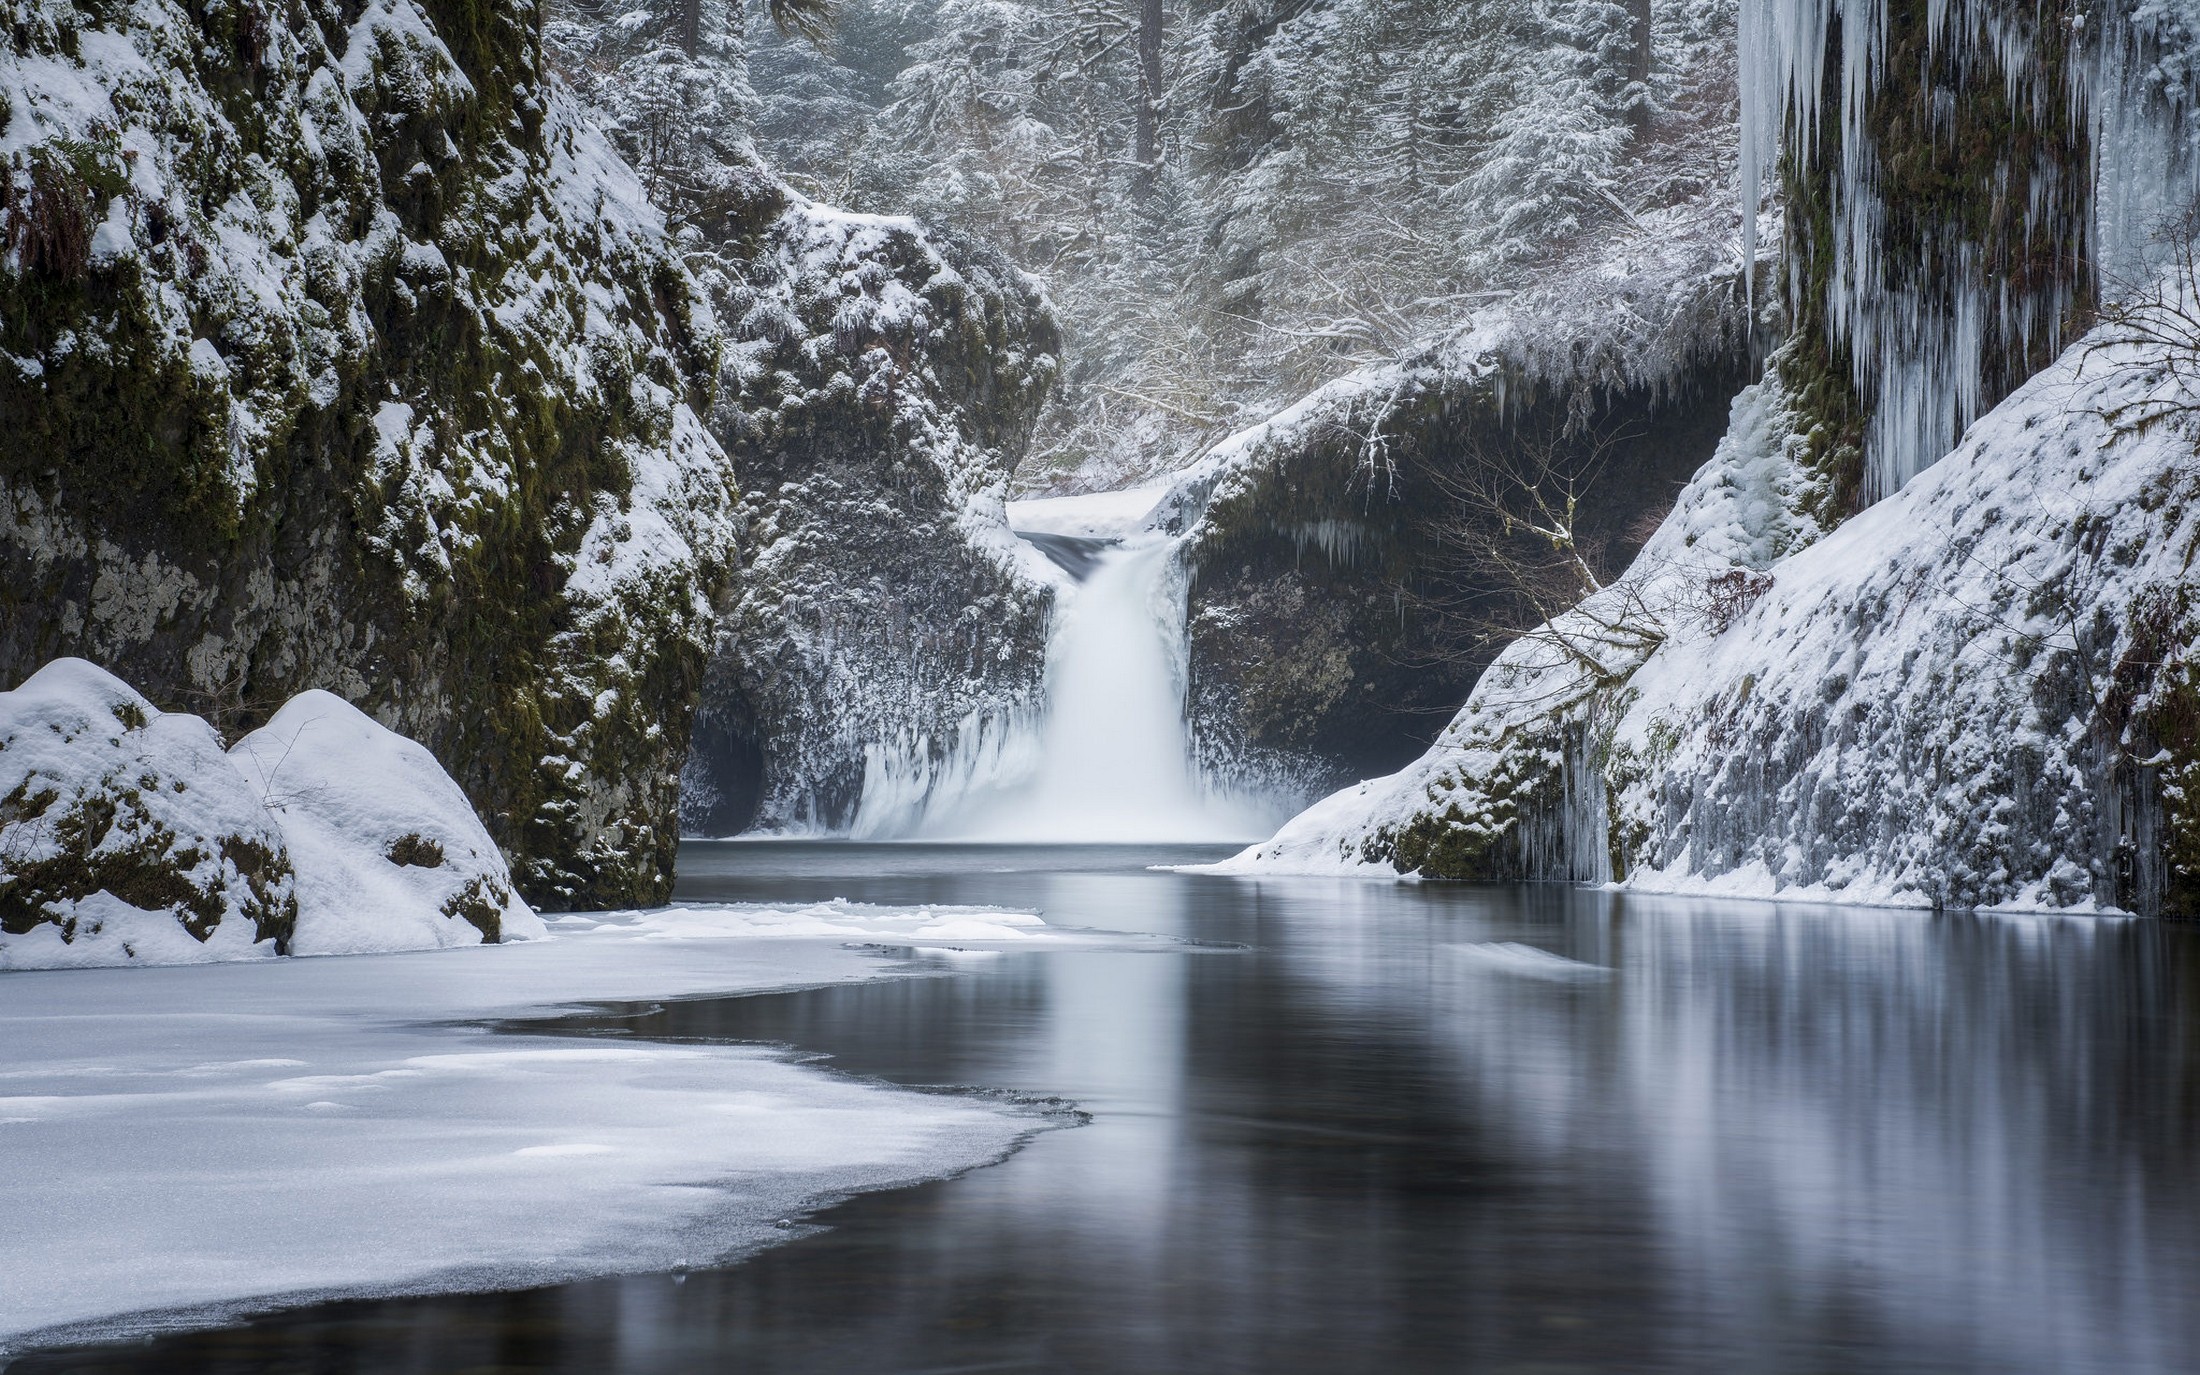 General 2200x1375 nature landscape forest mountains waterfall river snow winter cold ice outdoors